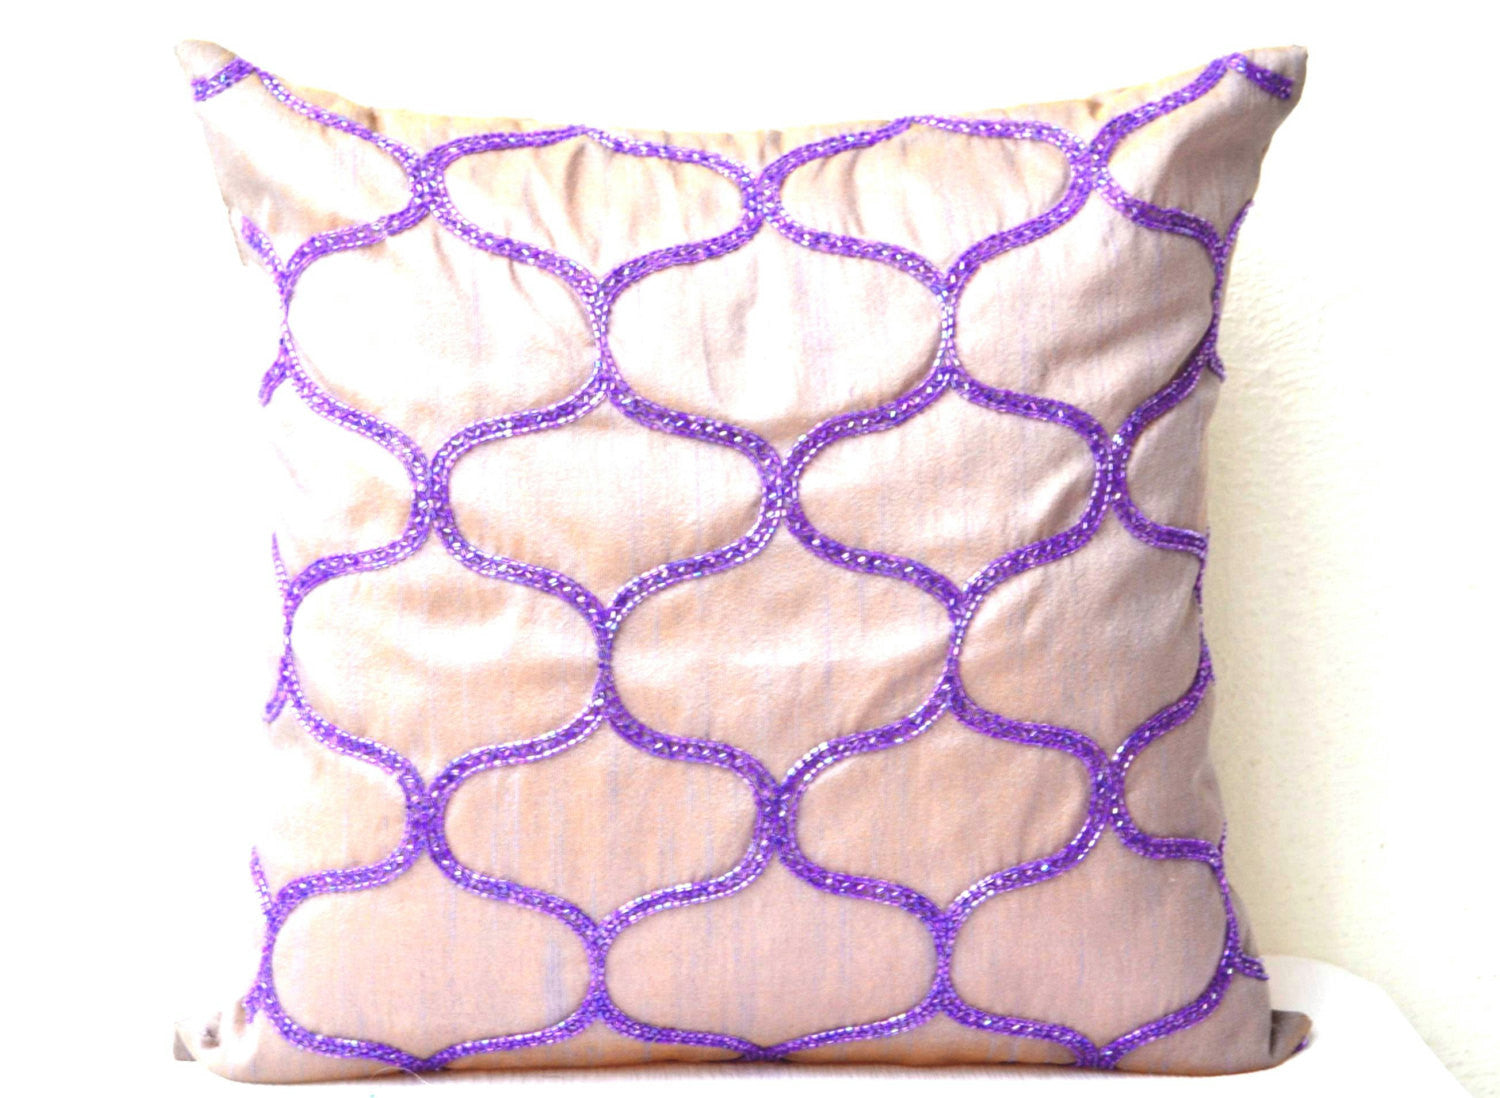 Shop online for handmade purple silk throw pillow cover with beads